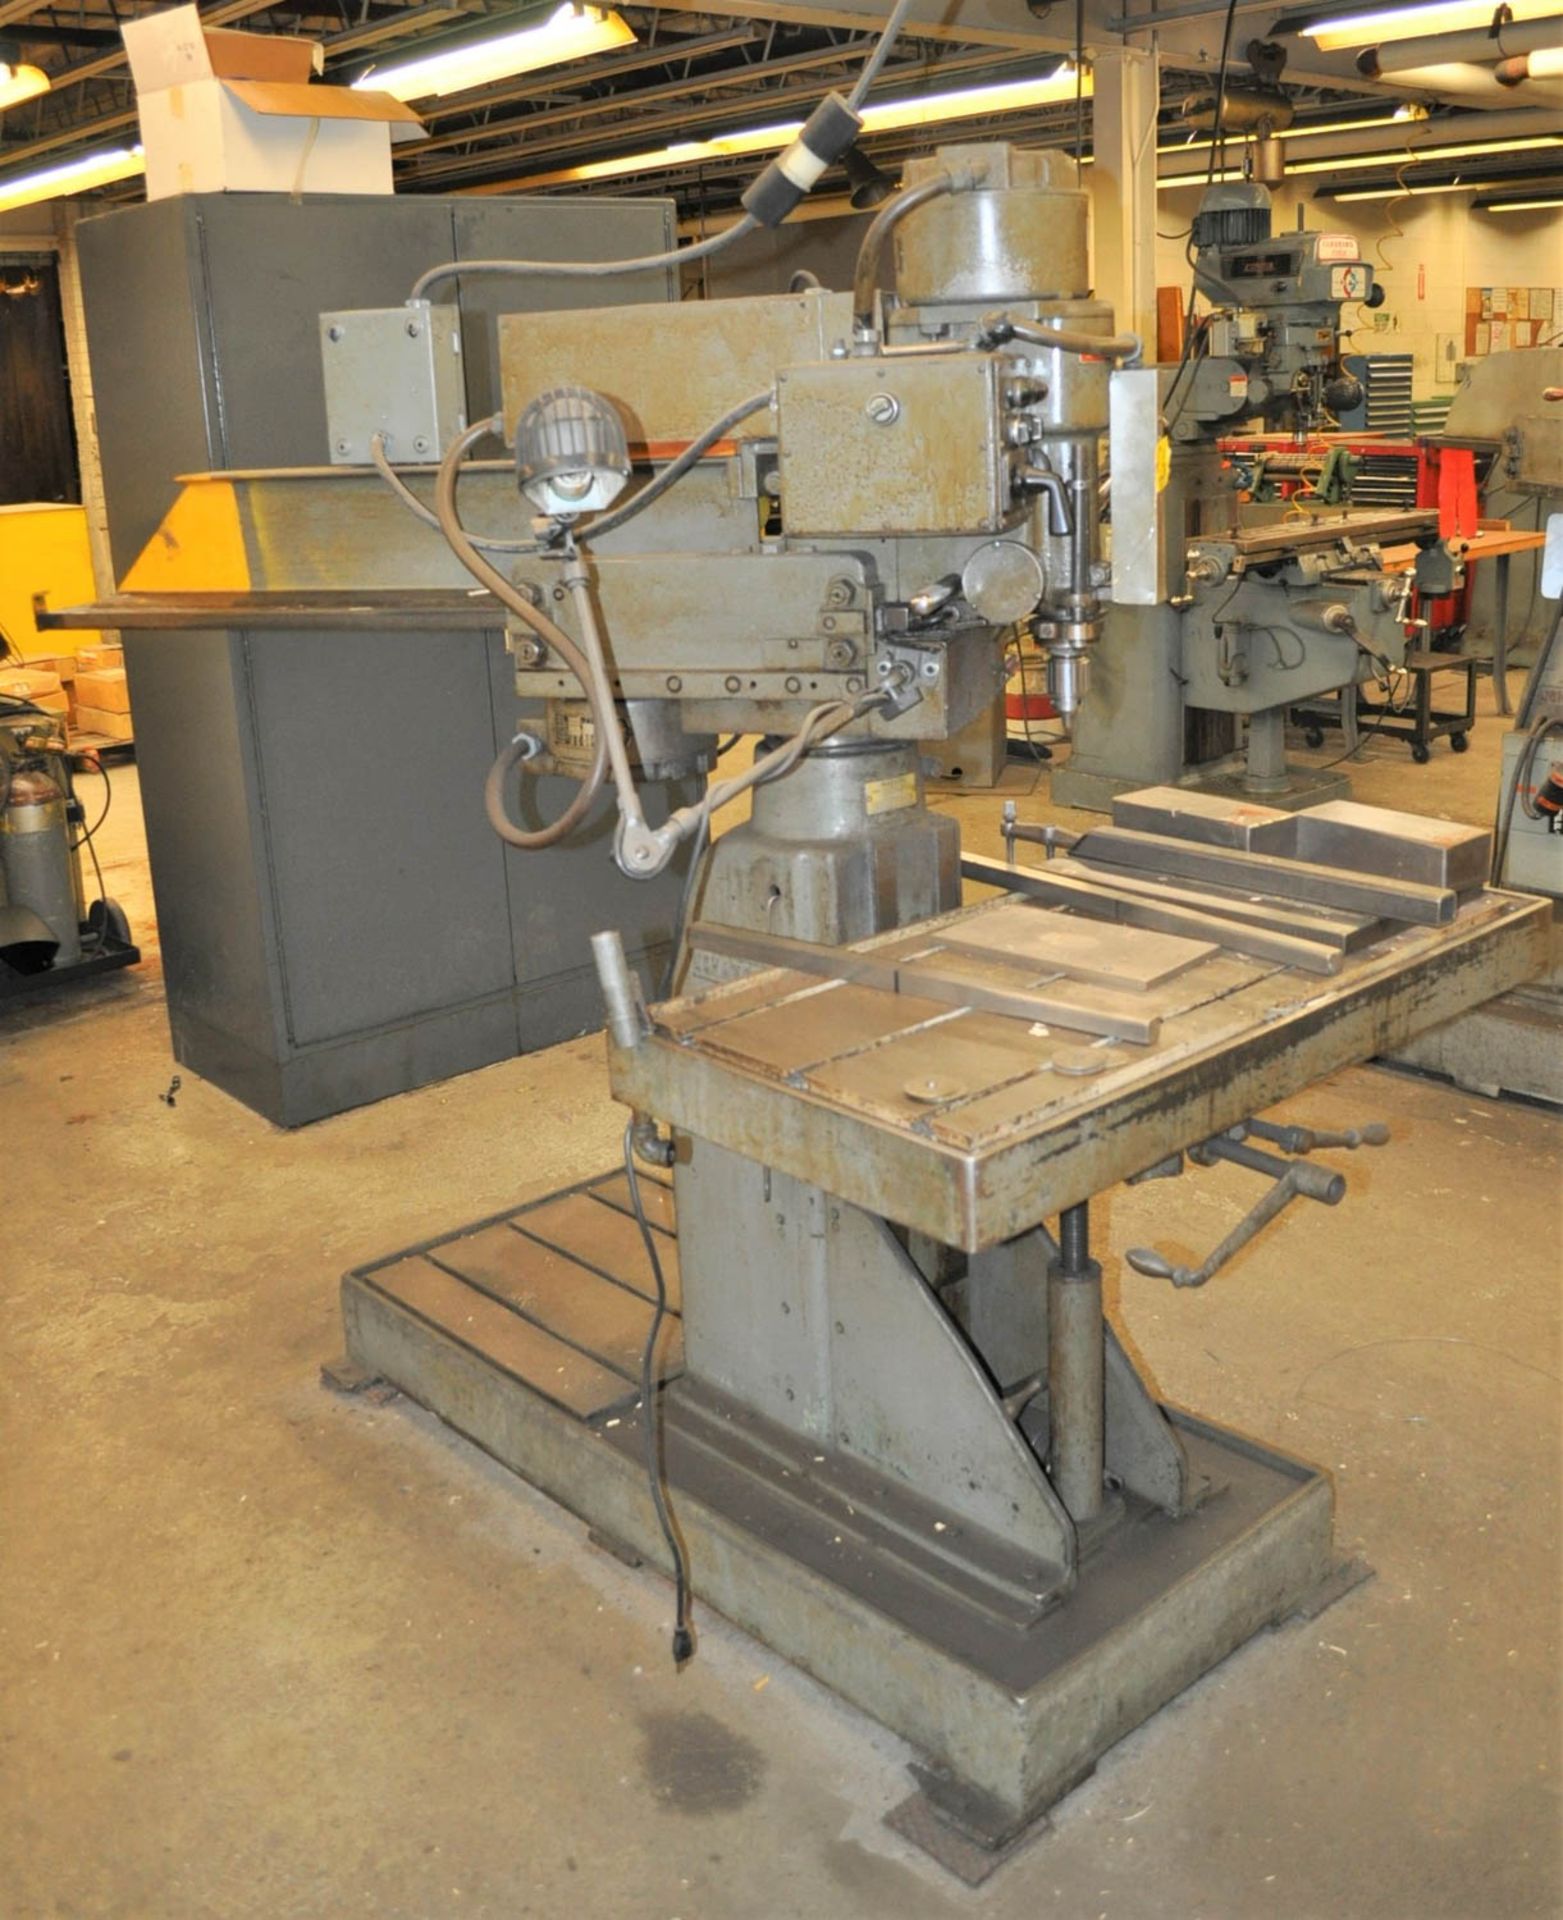 30" JOHANSSON RADIAL ARM DRILL, 37" X 17-3/4" T-SLOTTED TABLE, 8-SPINDLE SPEEDS, 125-1540 RPM, S/ - Image 2 of 3